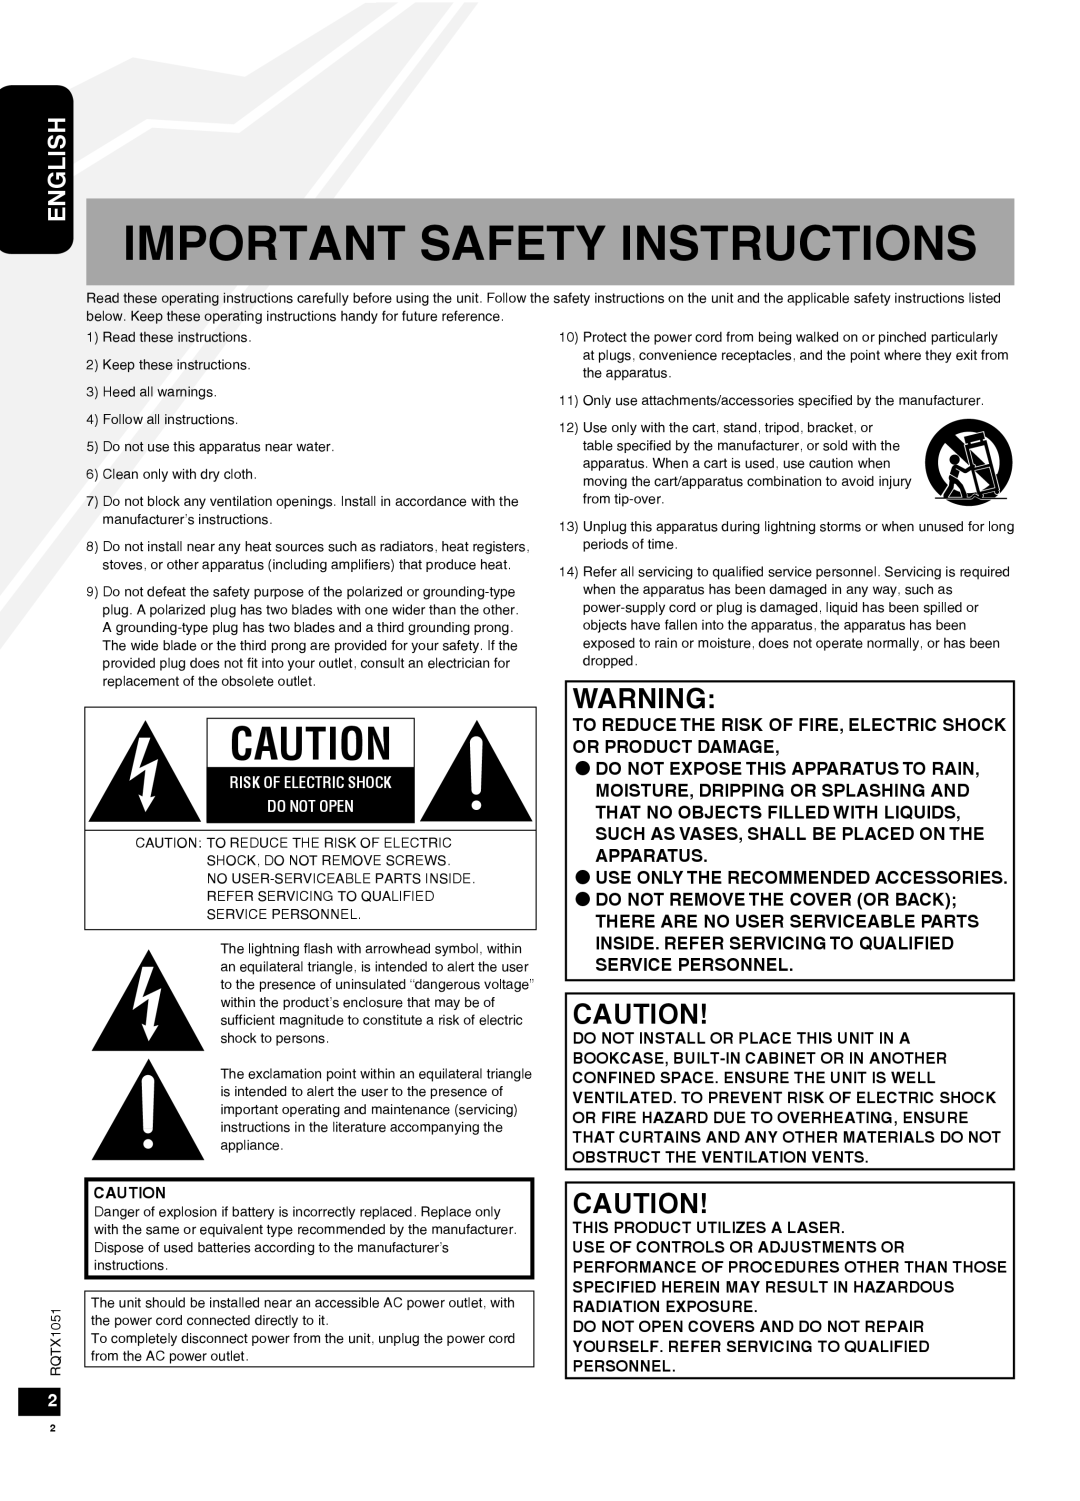 Panasonic SC-HC20 warranty Important Safety Instructions, English, Use Only The Recommended Accessories 